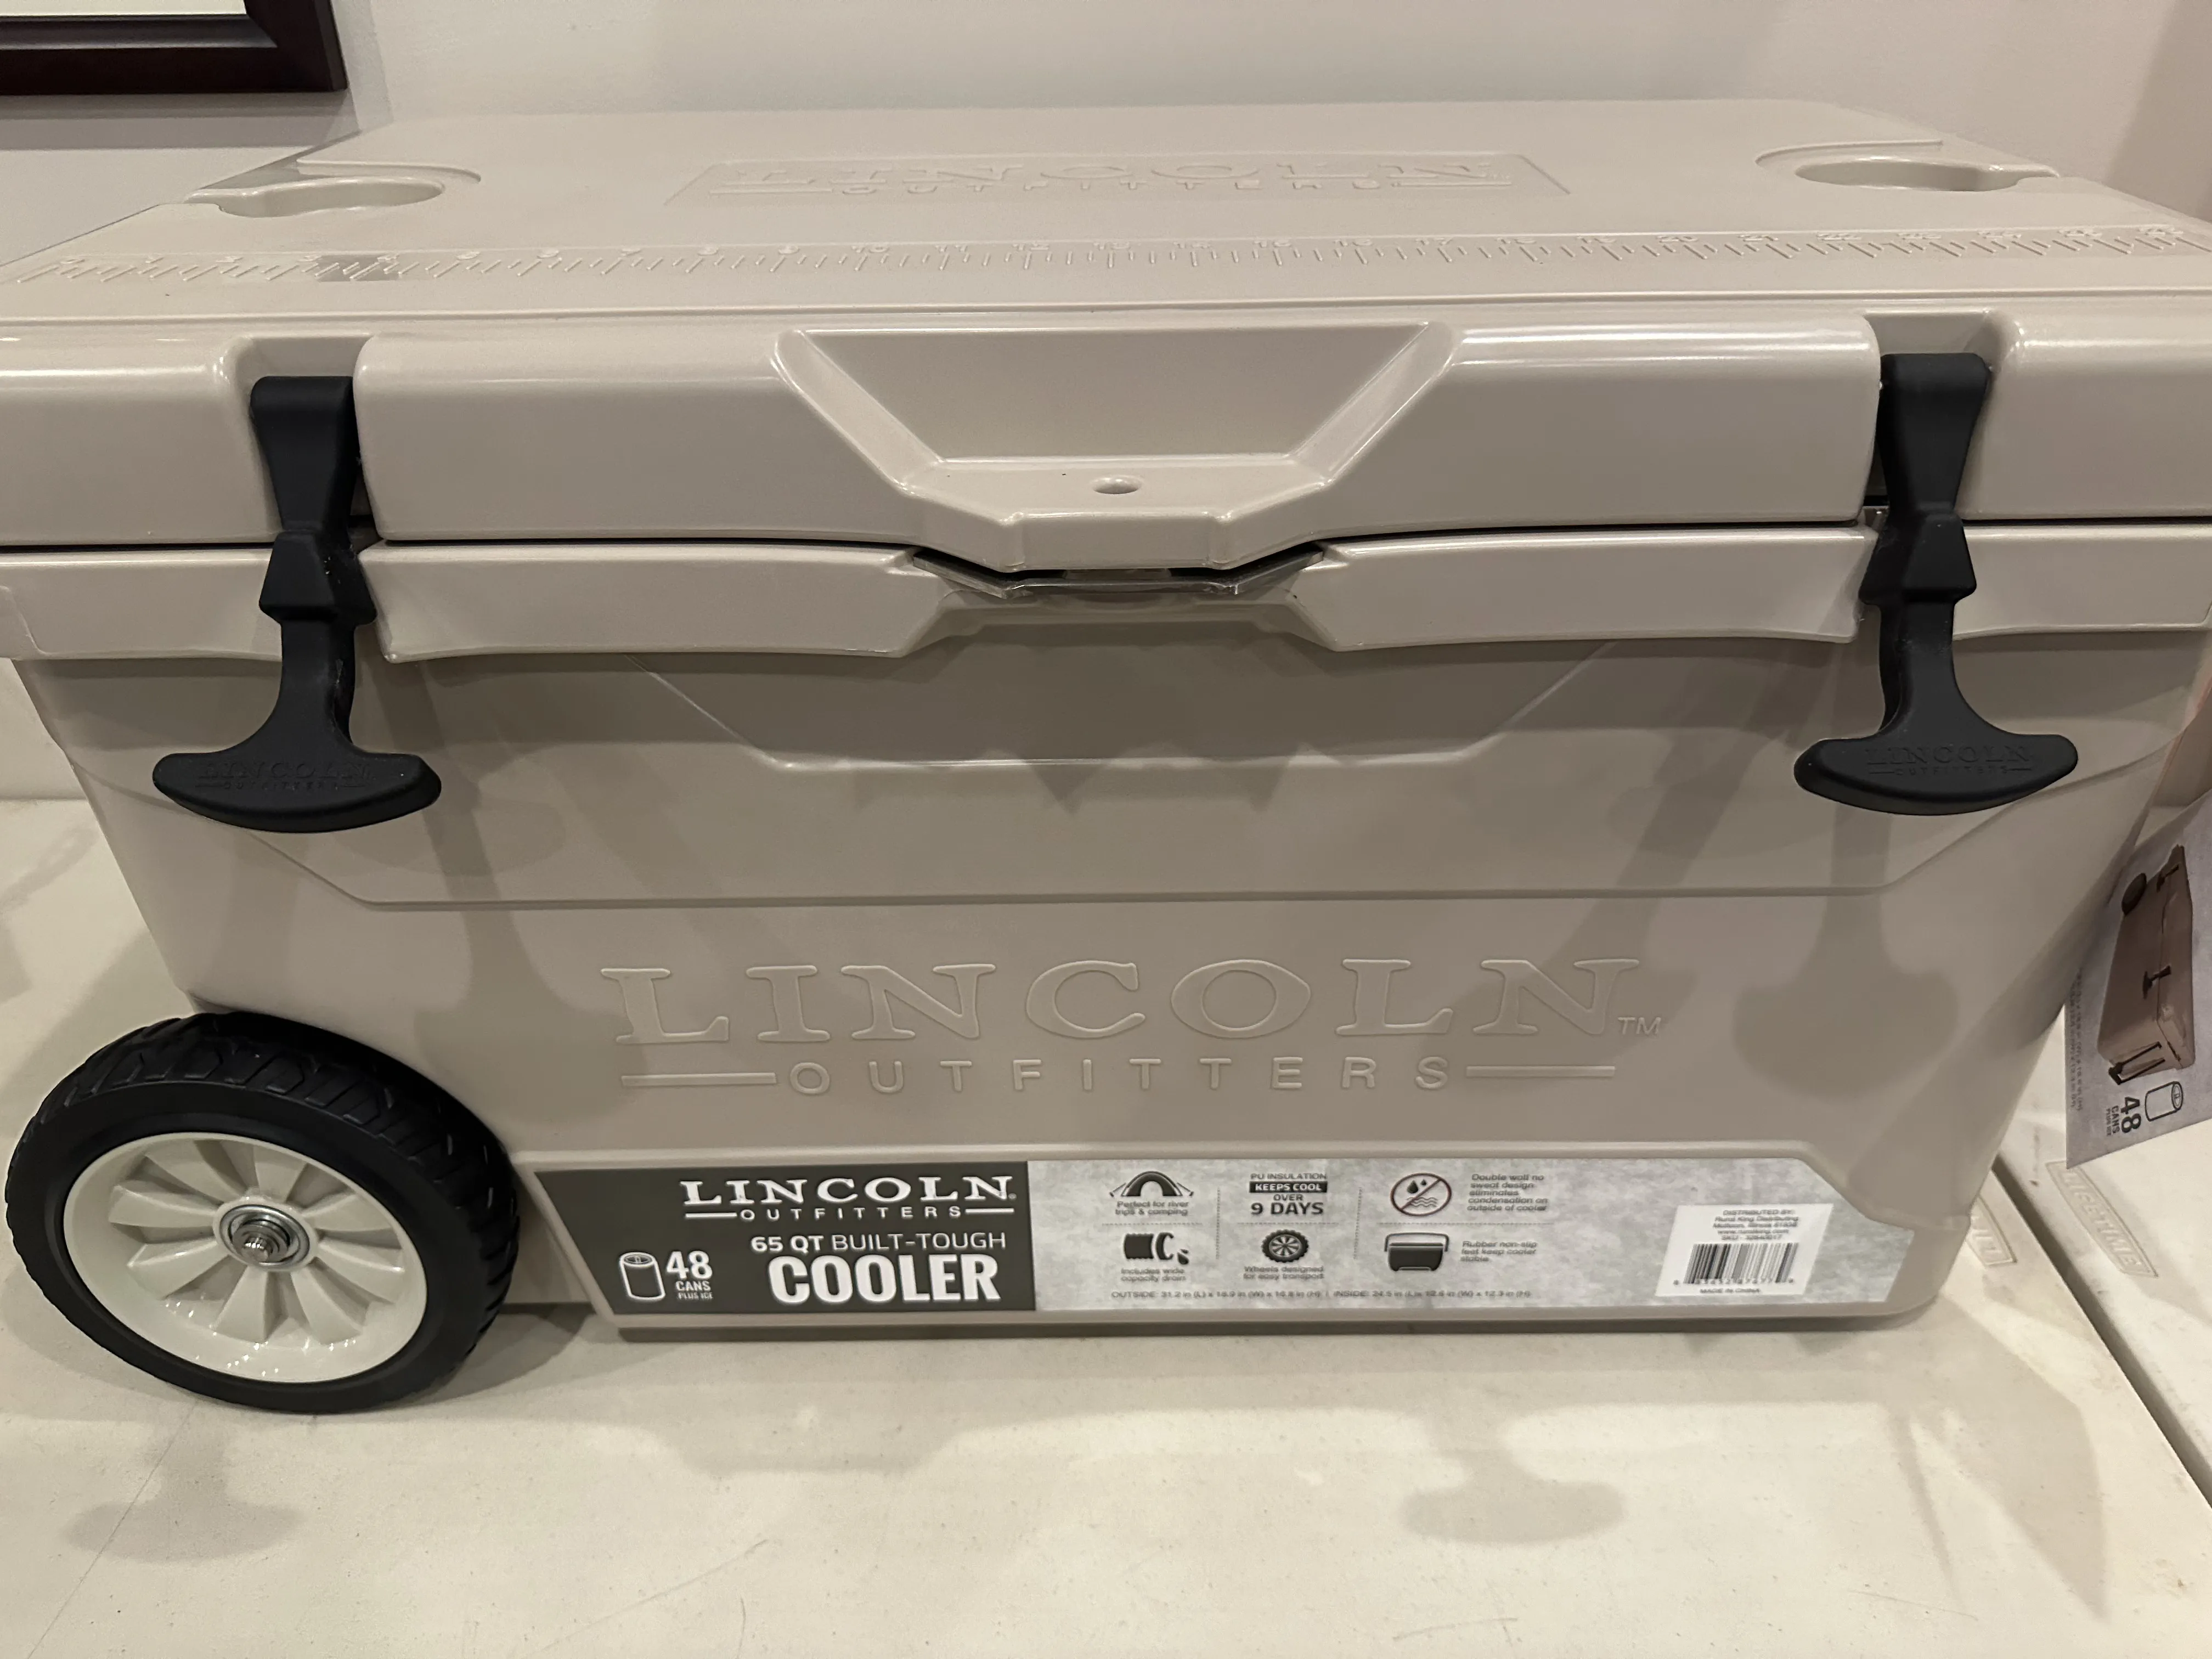 Lincoln Outfitters 85 Quart Cooler